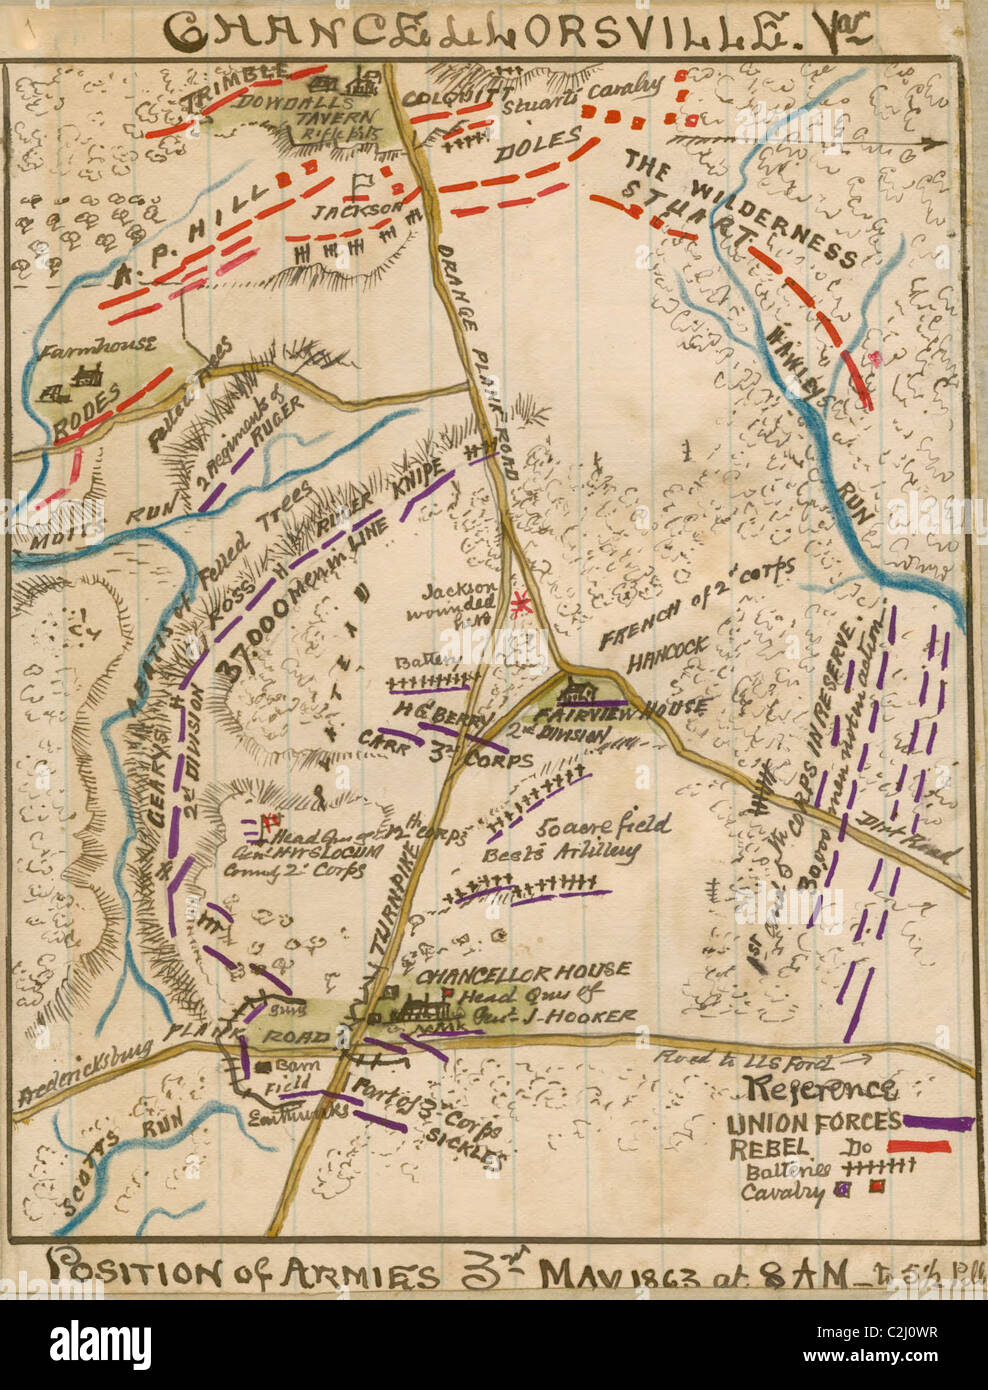 Chancellorsville, Va.. Position of armies 3rd May 1863 at 8 a.m. to 5 1/2 p.m. Stock Photo